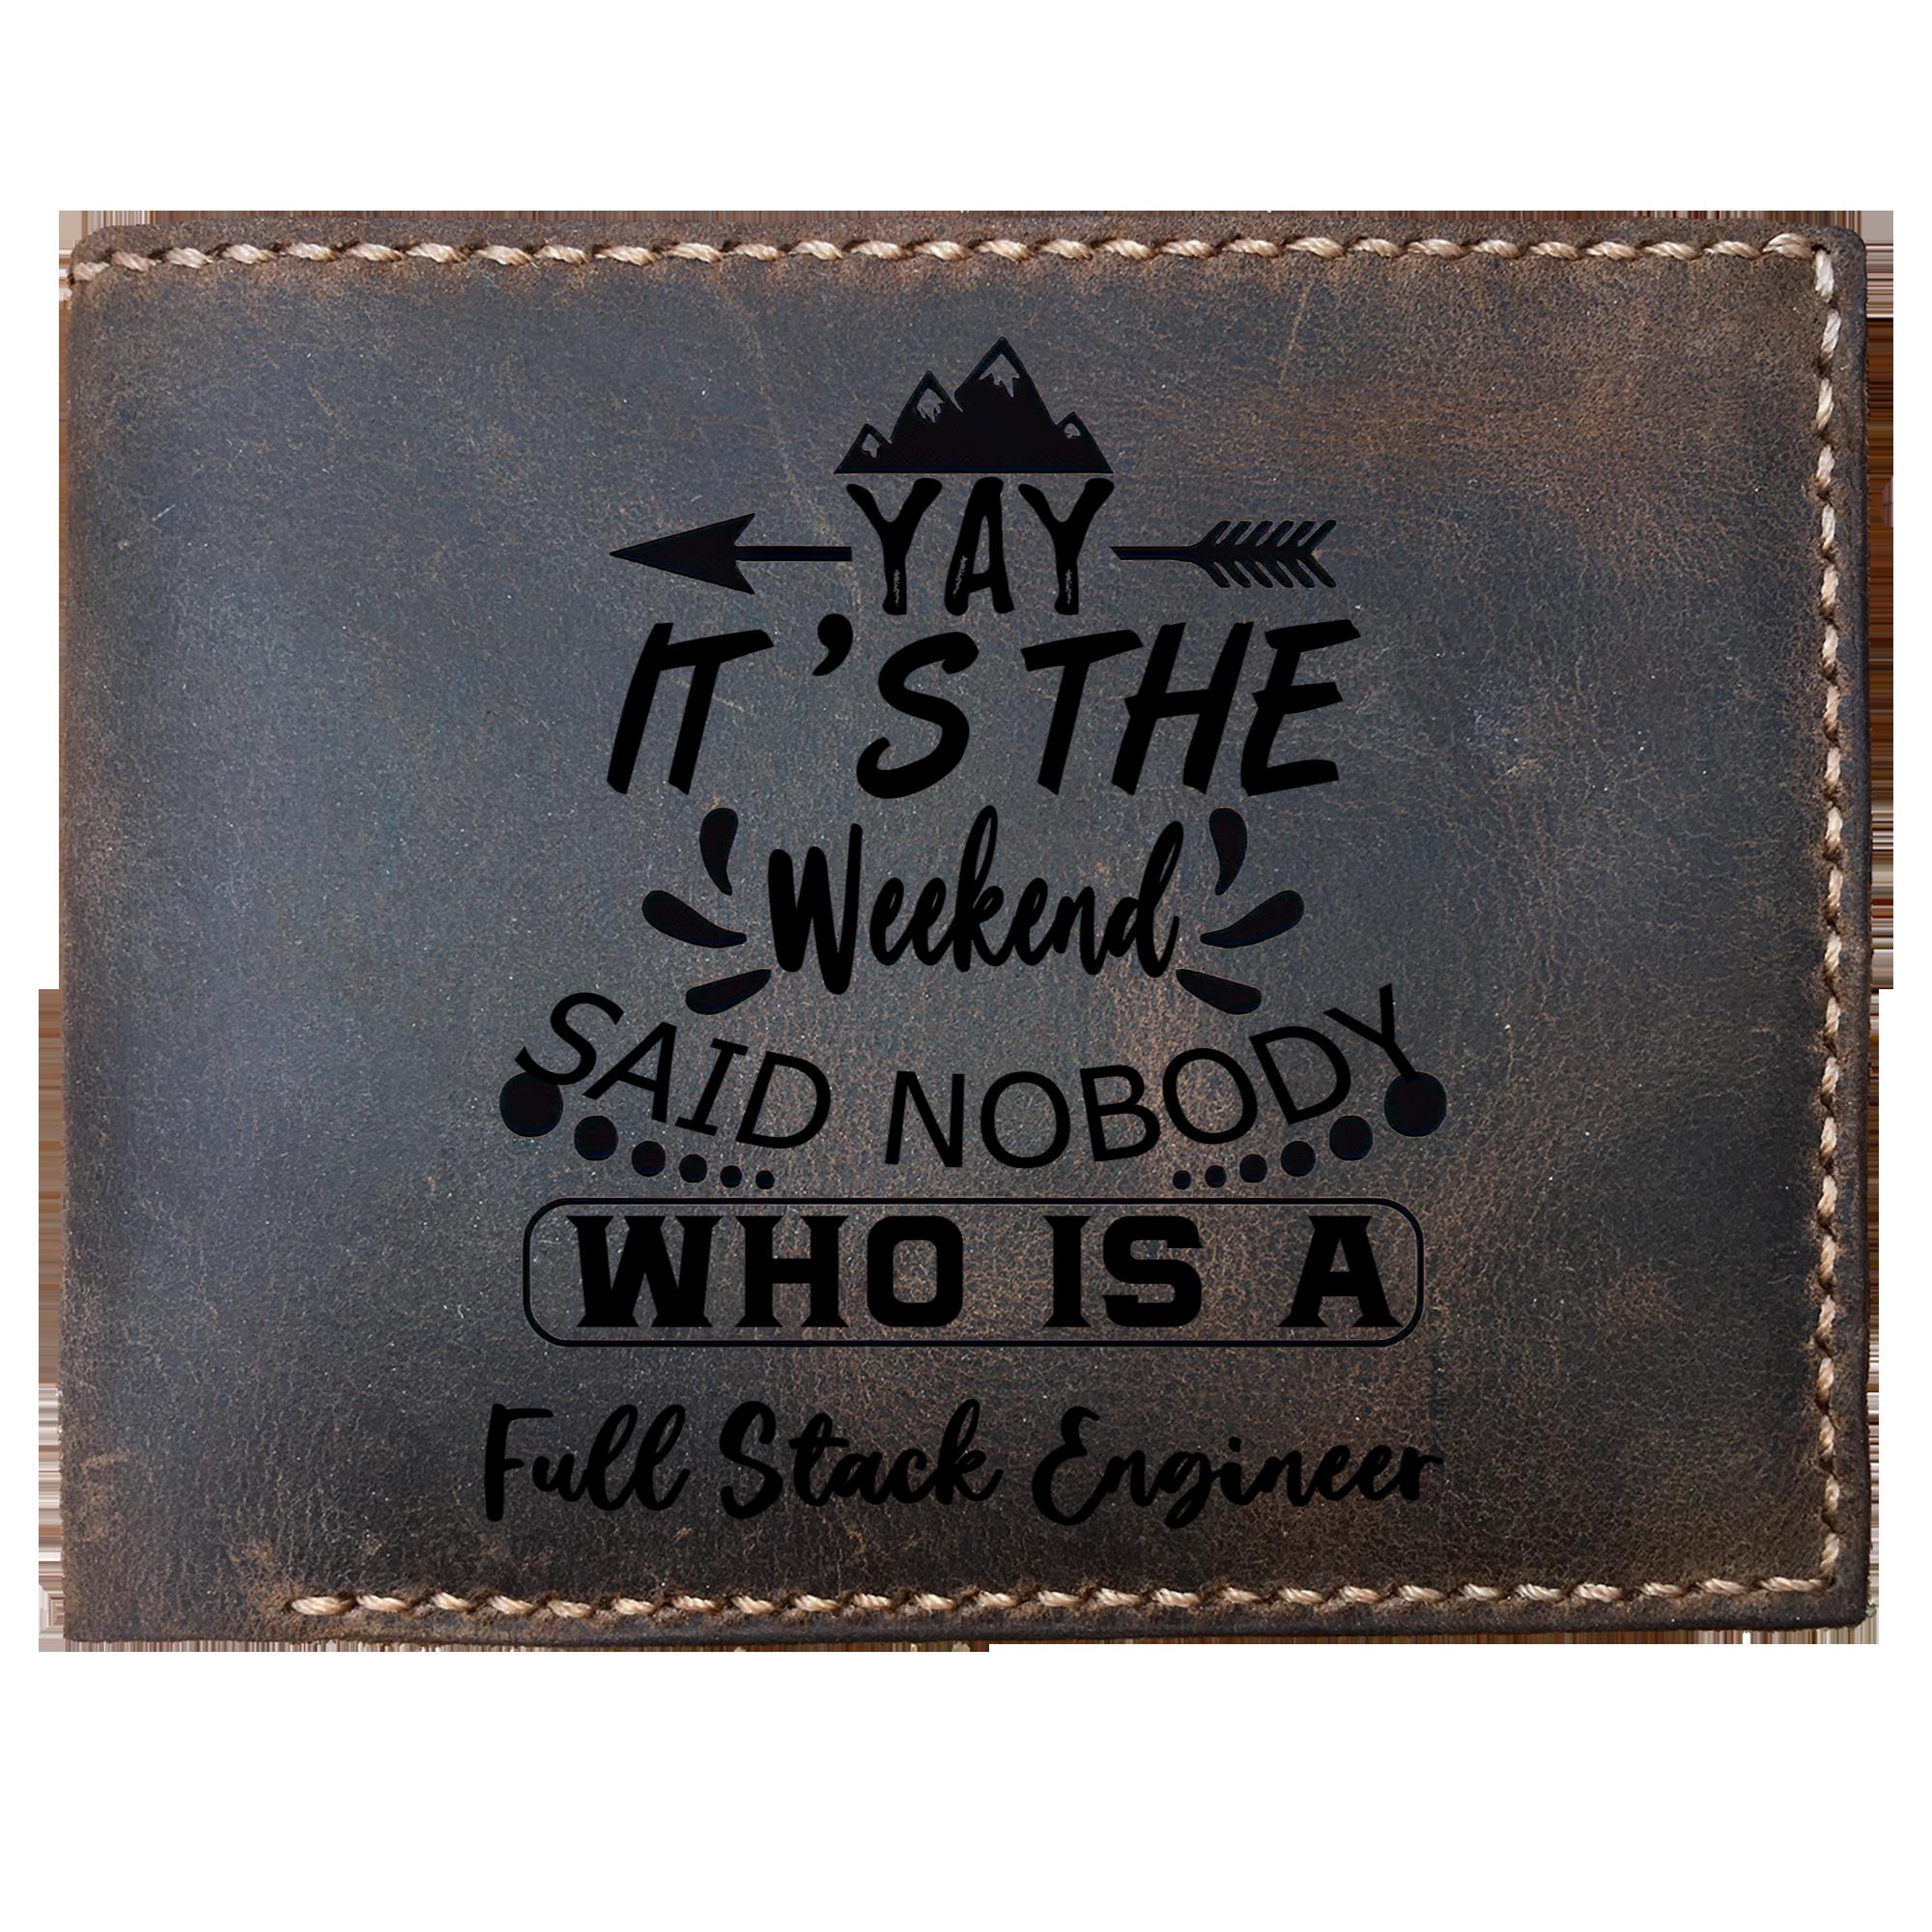 Skitongifts Funny Custom Laser Engraved Bifold Leather Wallet For Men, It's The Weekend Said Nobody Who Is A Full Stack Engineer, Father's Day Gifts